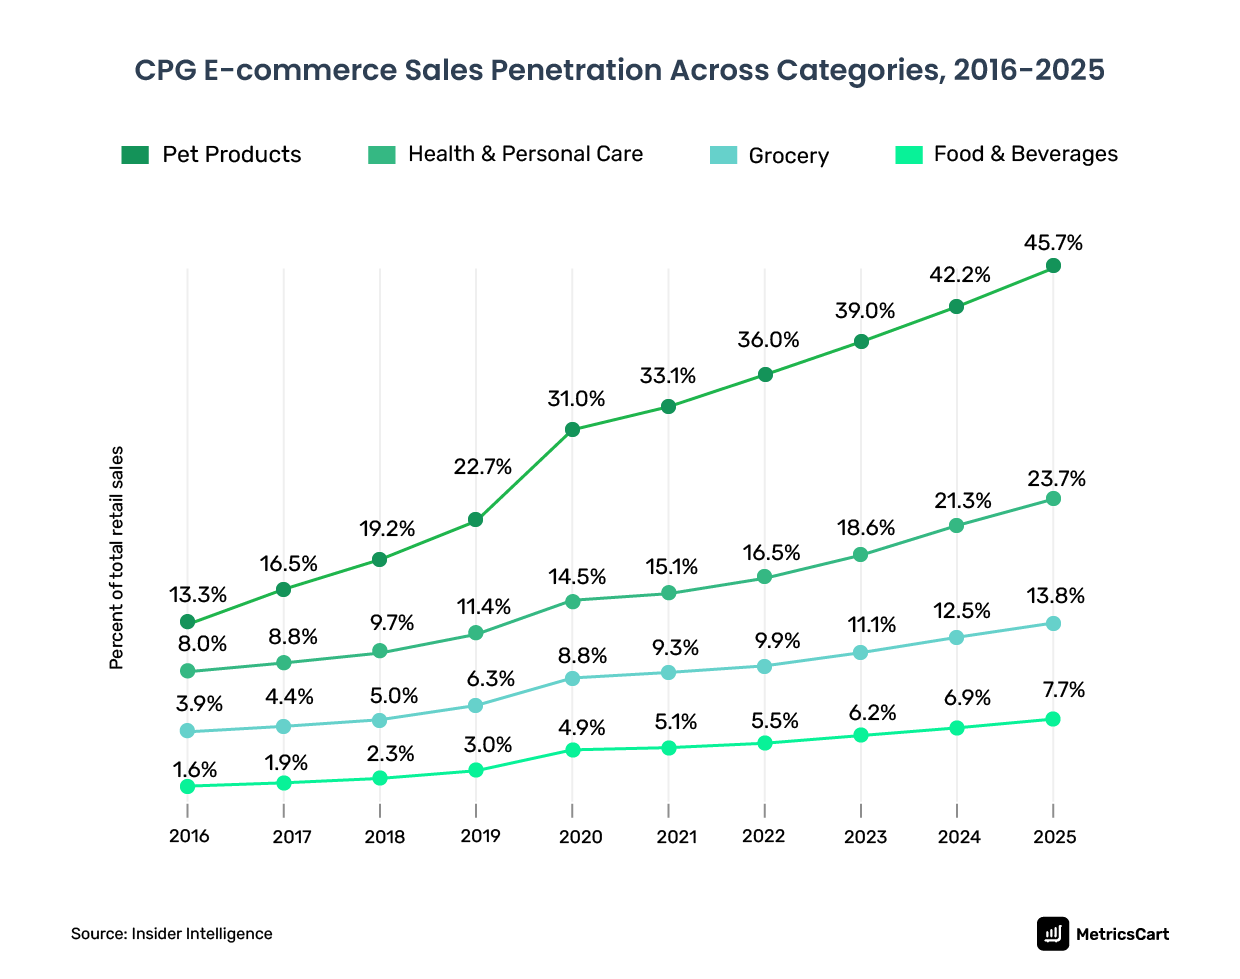 chart showing CPG ecommerce sales in different categories, 2016 to 2025